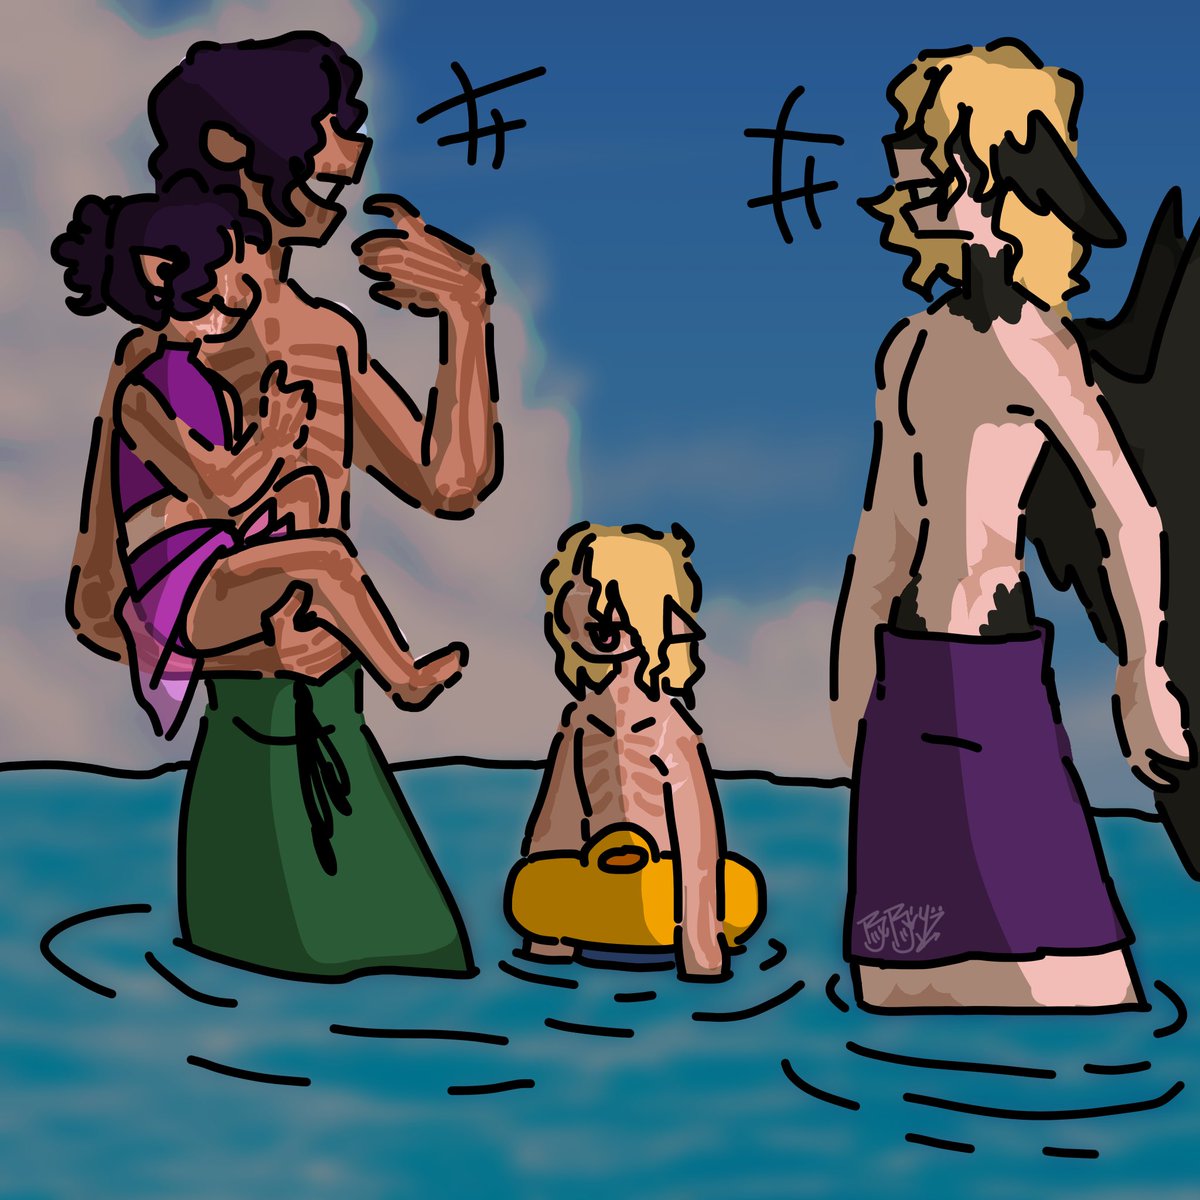 Day 3 of #DeathduoWeek : Family Day

Beach day!!
#missafanart #philzafanart #qsmp #deathduofanart #qsmpeggsfanart